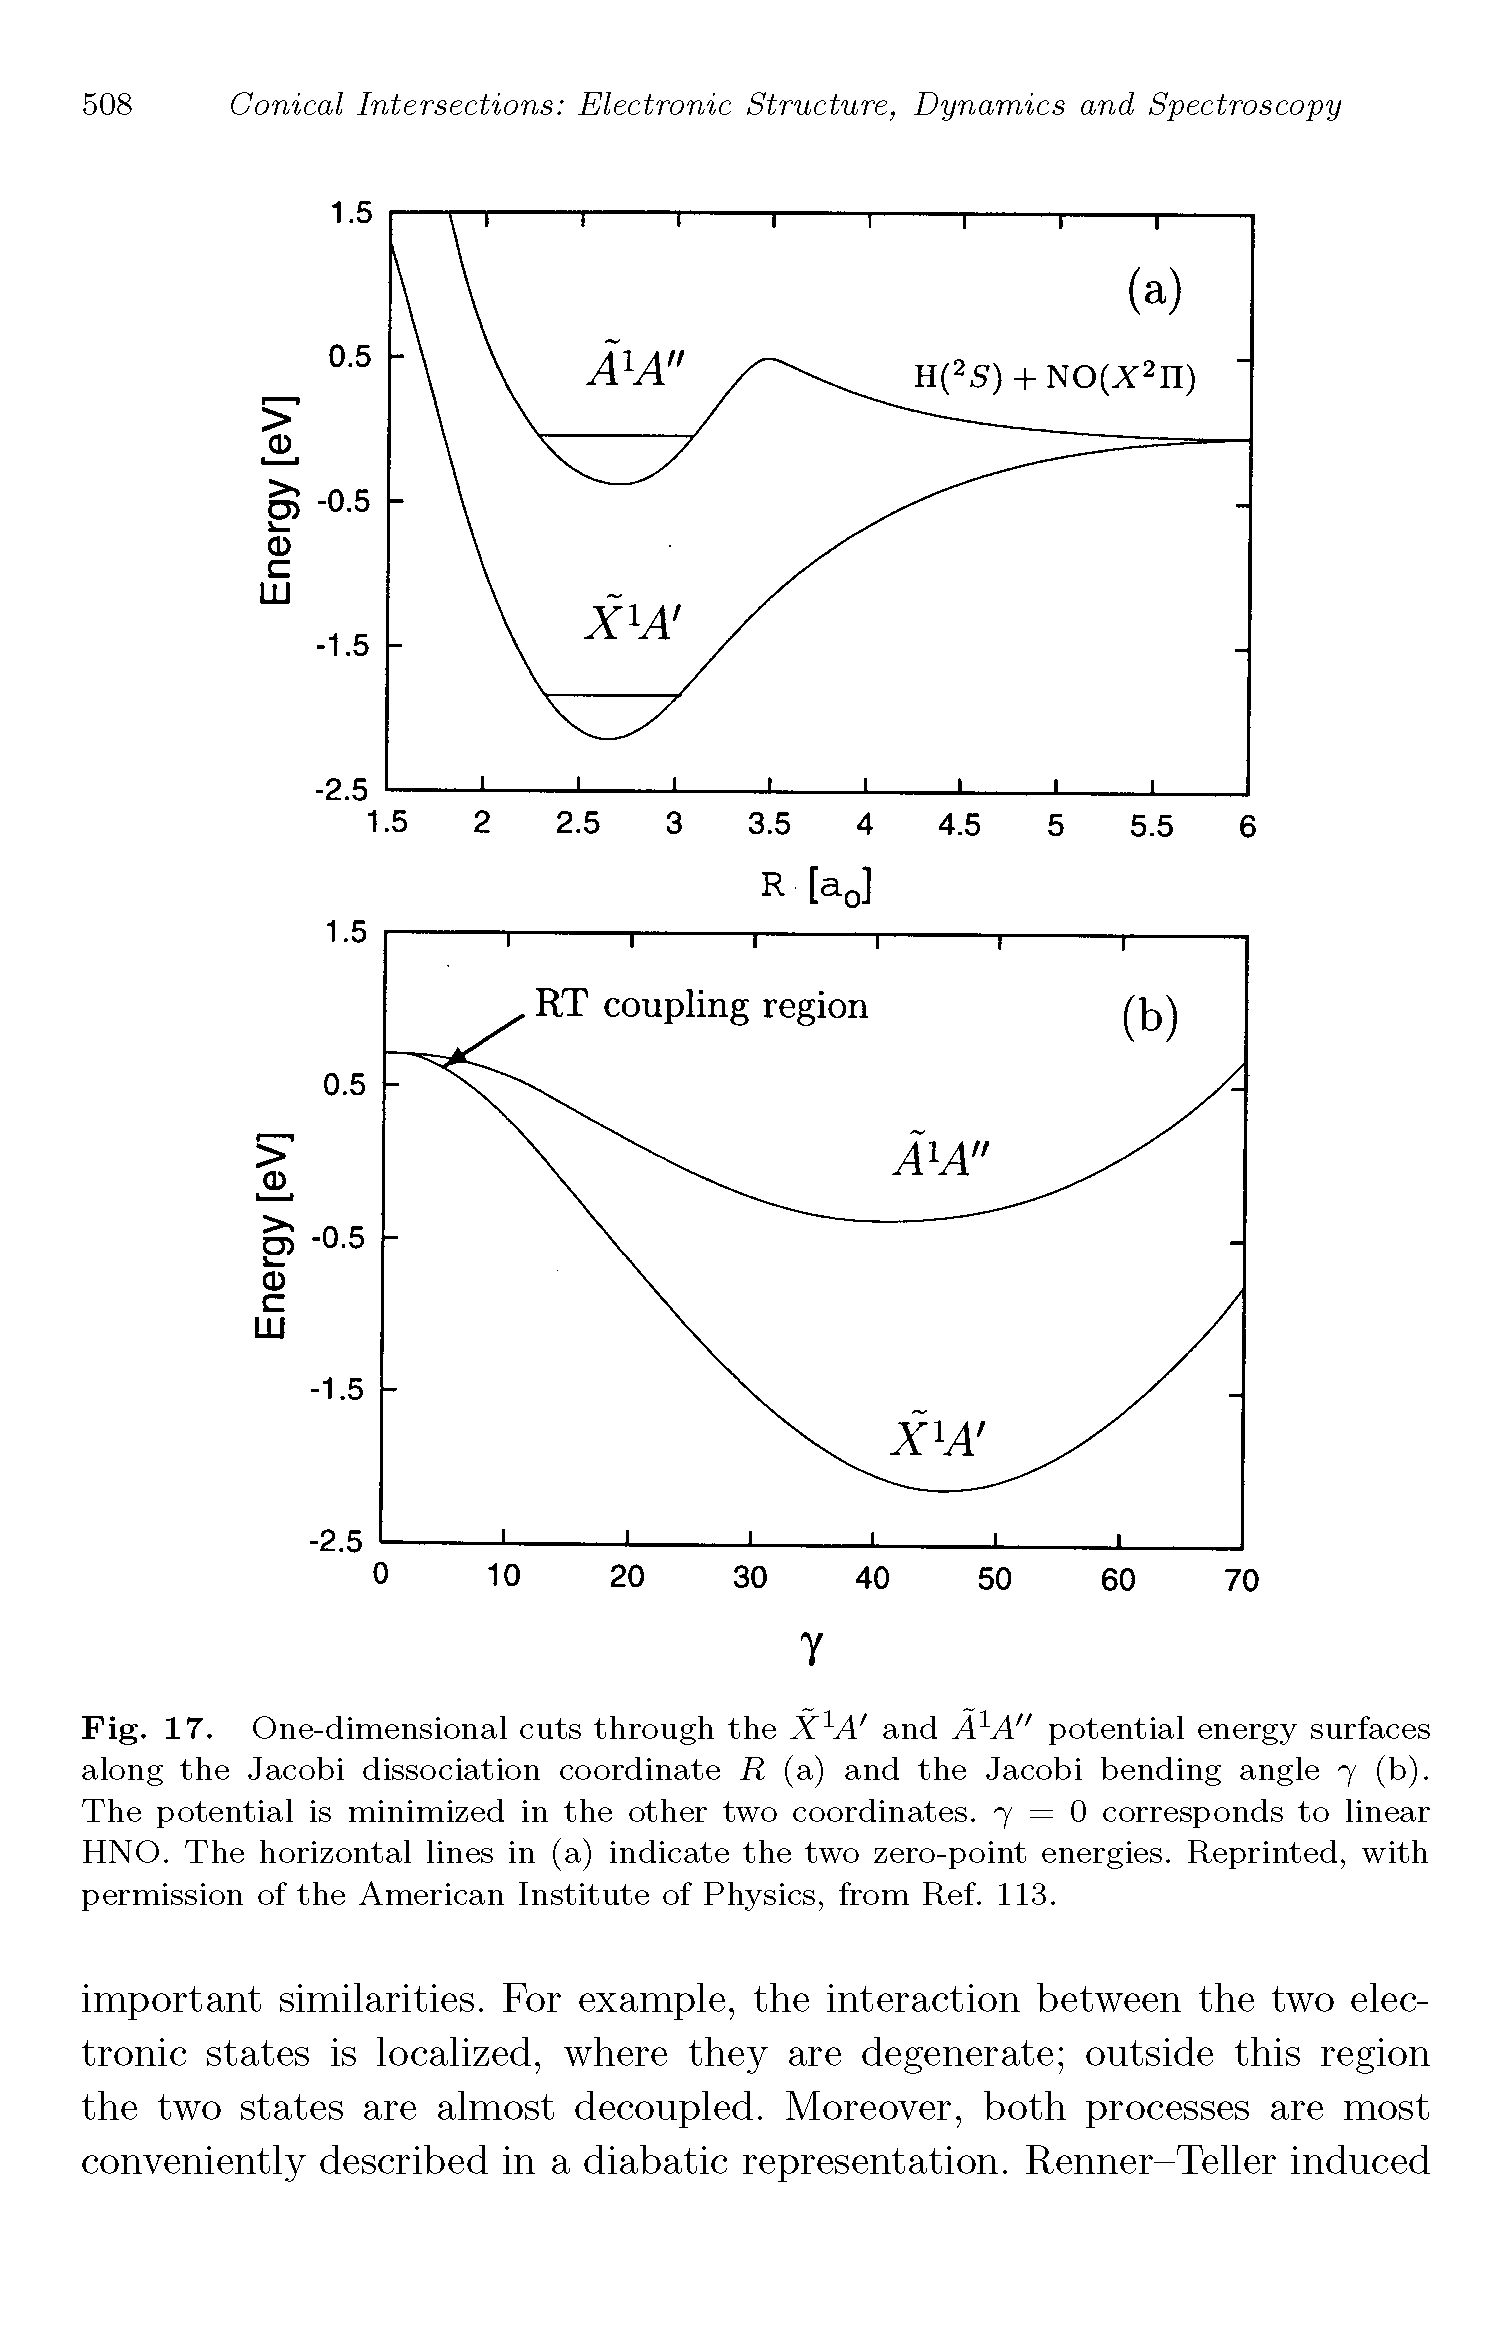 Fig. 17. One-dimensional cuts through the X A and AAA potential energy surfaces along the Jacobi dissociation coordinate K (a) and the Jacobi bending angle 7 (b). The potential is minimized in the other two coordinates. 7 = 0 corresponds to linear HNO. The horizontal lines in (a) indicate the two zero-point energies. Reprinted, with permission of the American Institute of Physics, from Ref. 113.